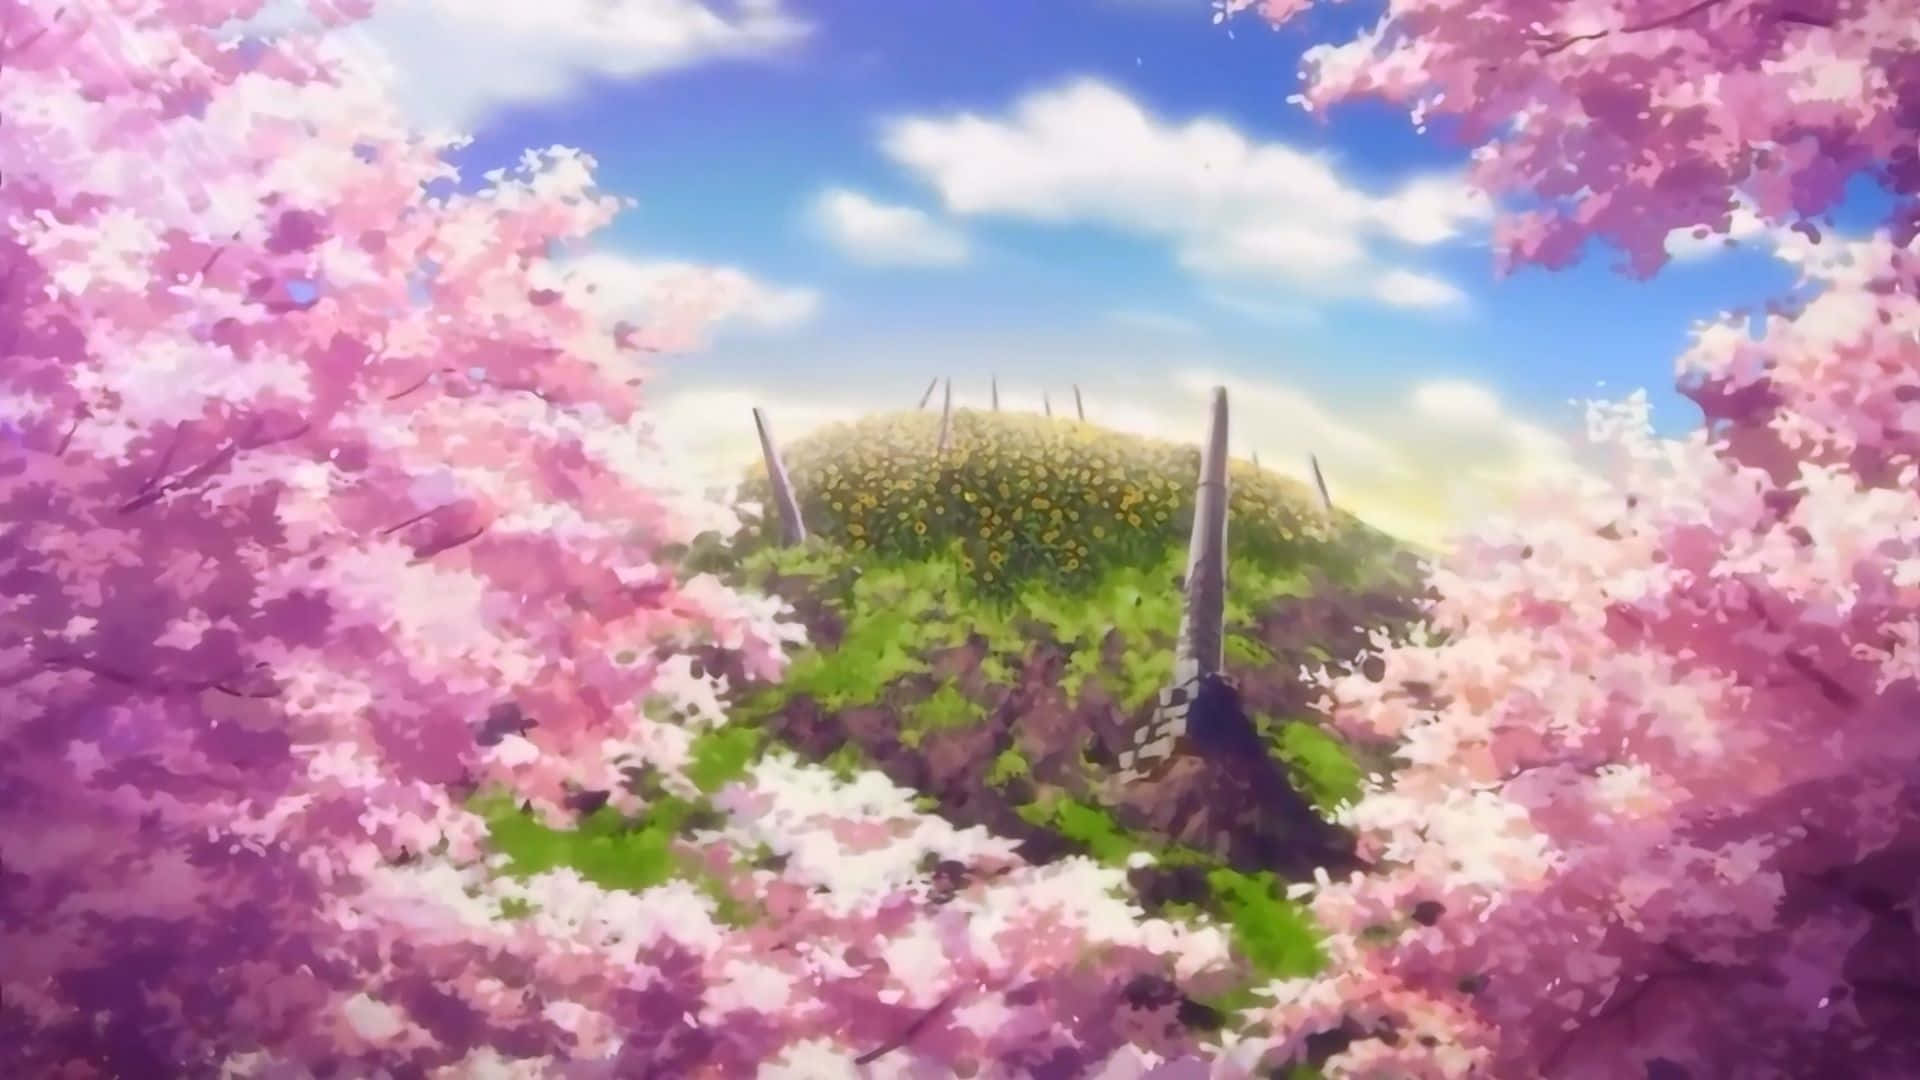 "A Magical World Enveloped in Cherry Blossoms" Wallpaper